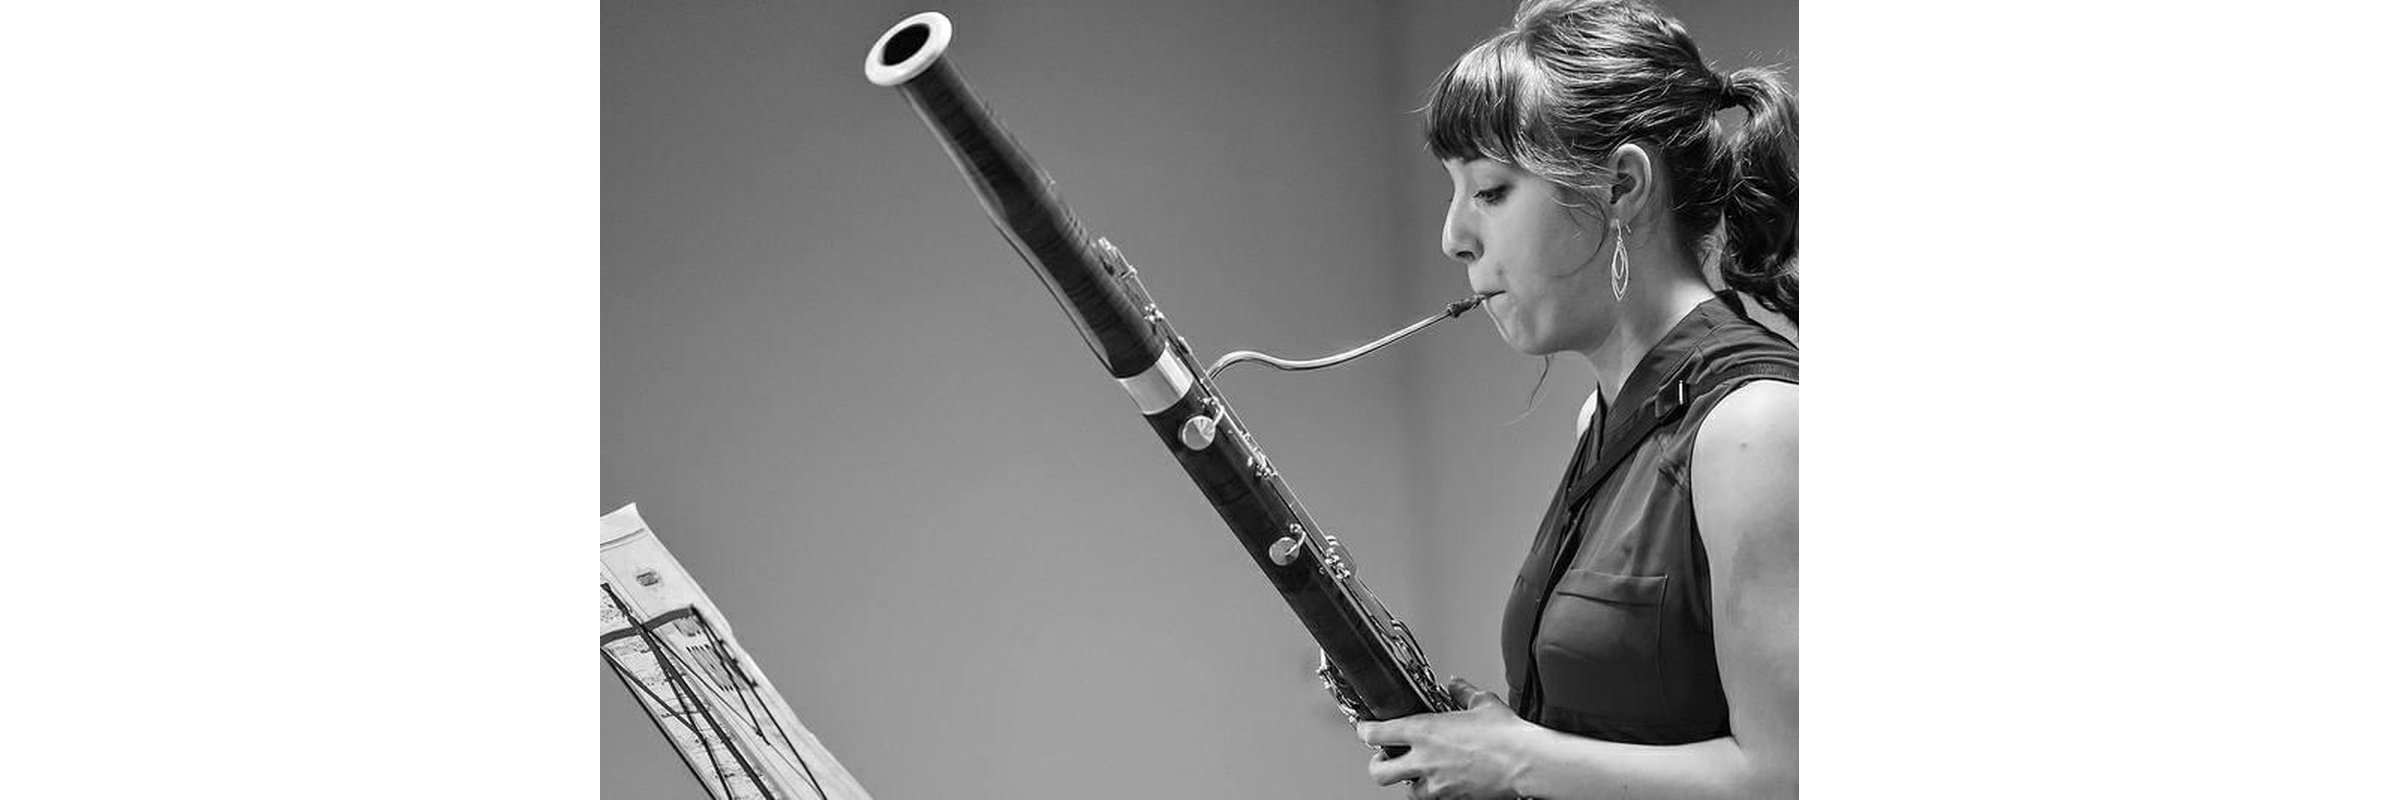 CommonTime - Int'l Artist Festival 2021 - Solo Bassoon House Concert and Masterclass with Kassandra Ormsby